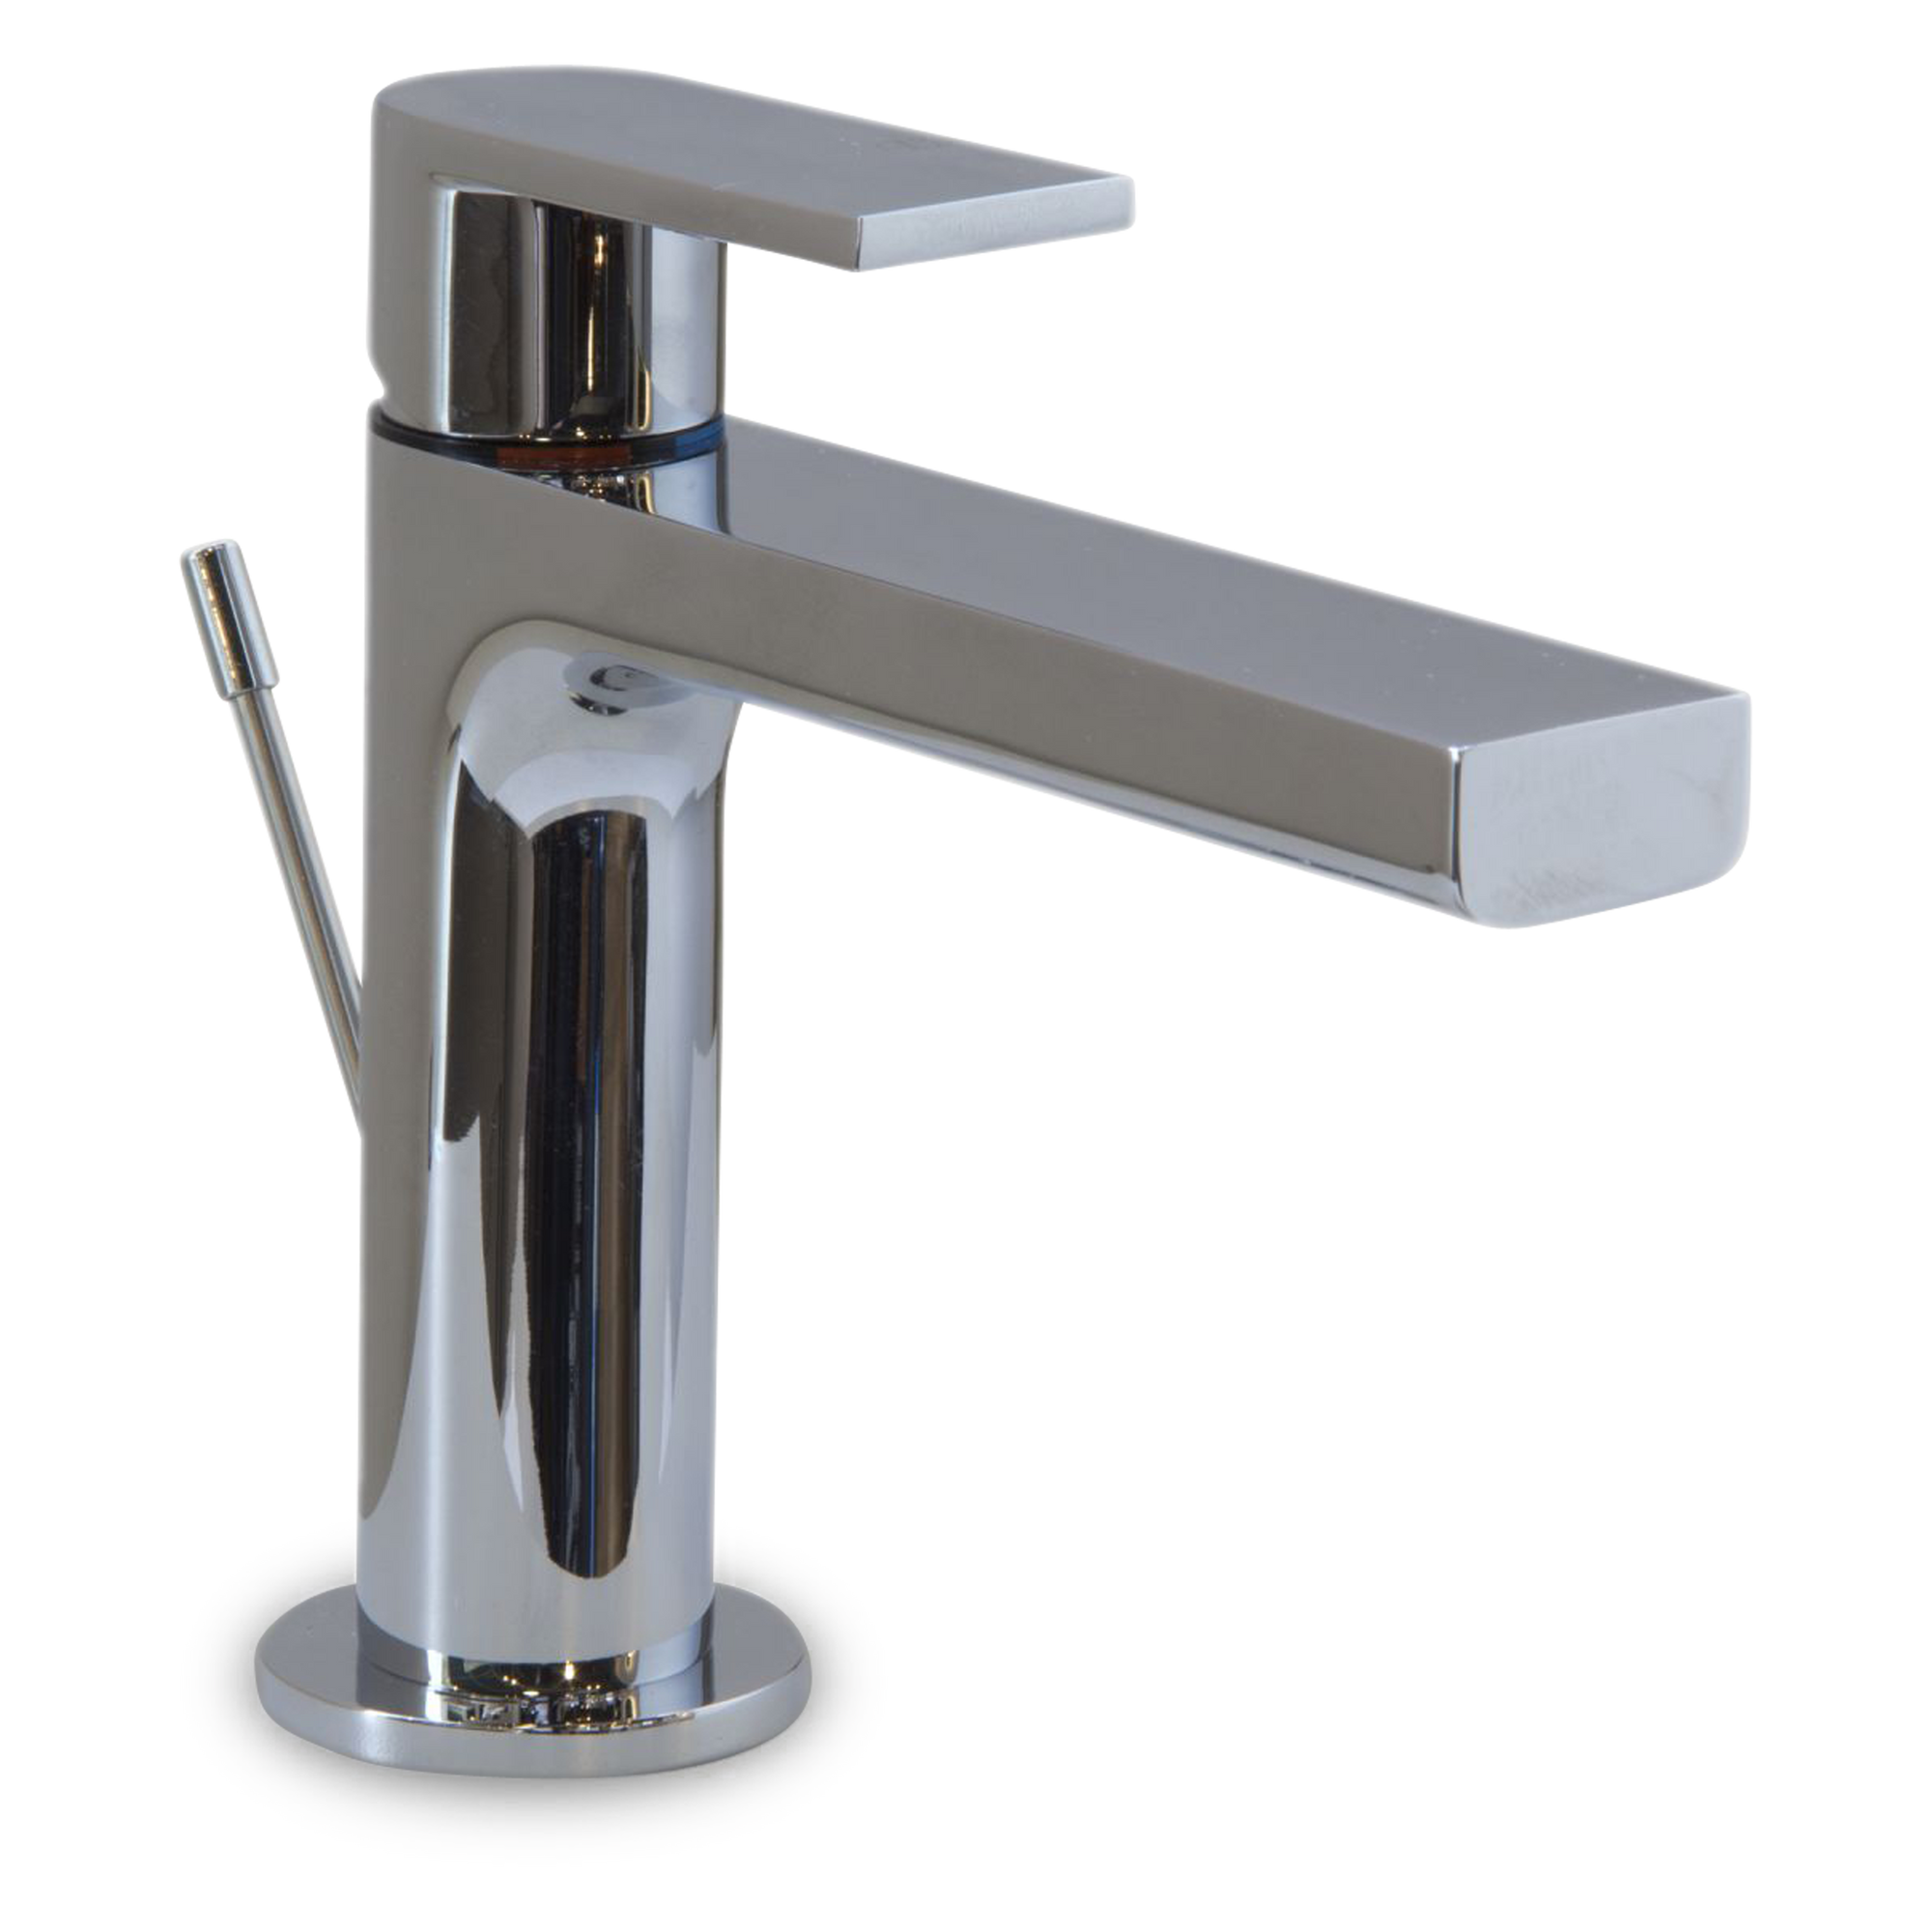 A single-hole basin faucet with one lever handle.